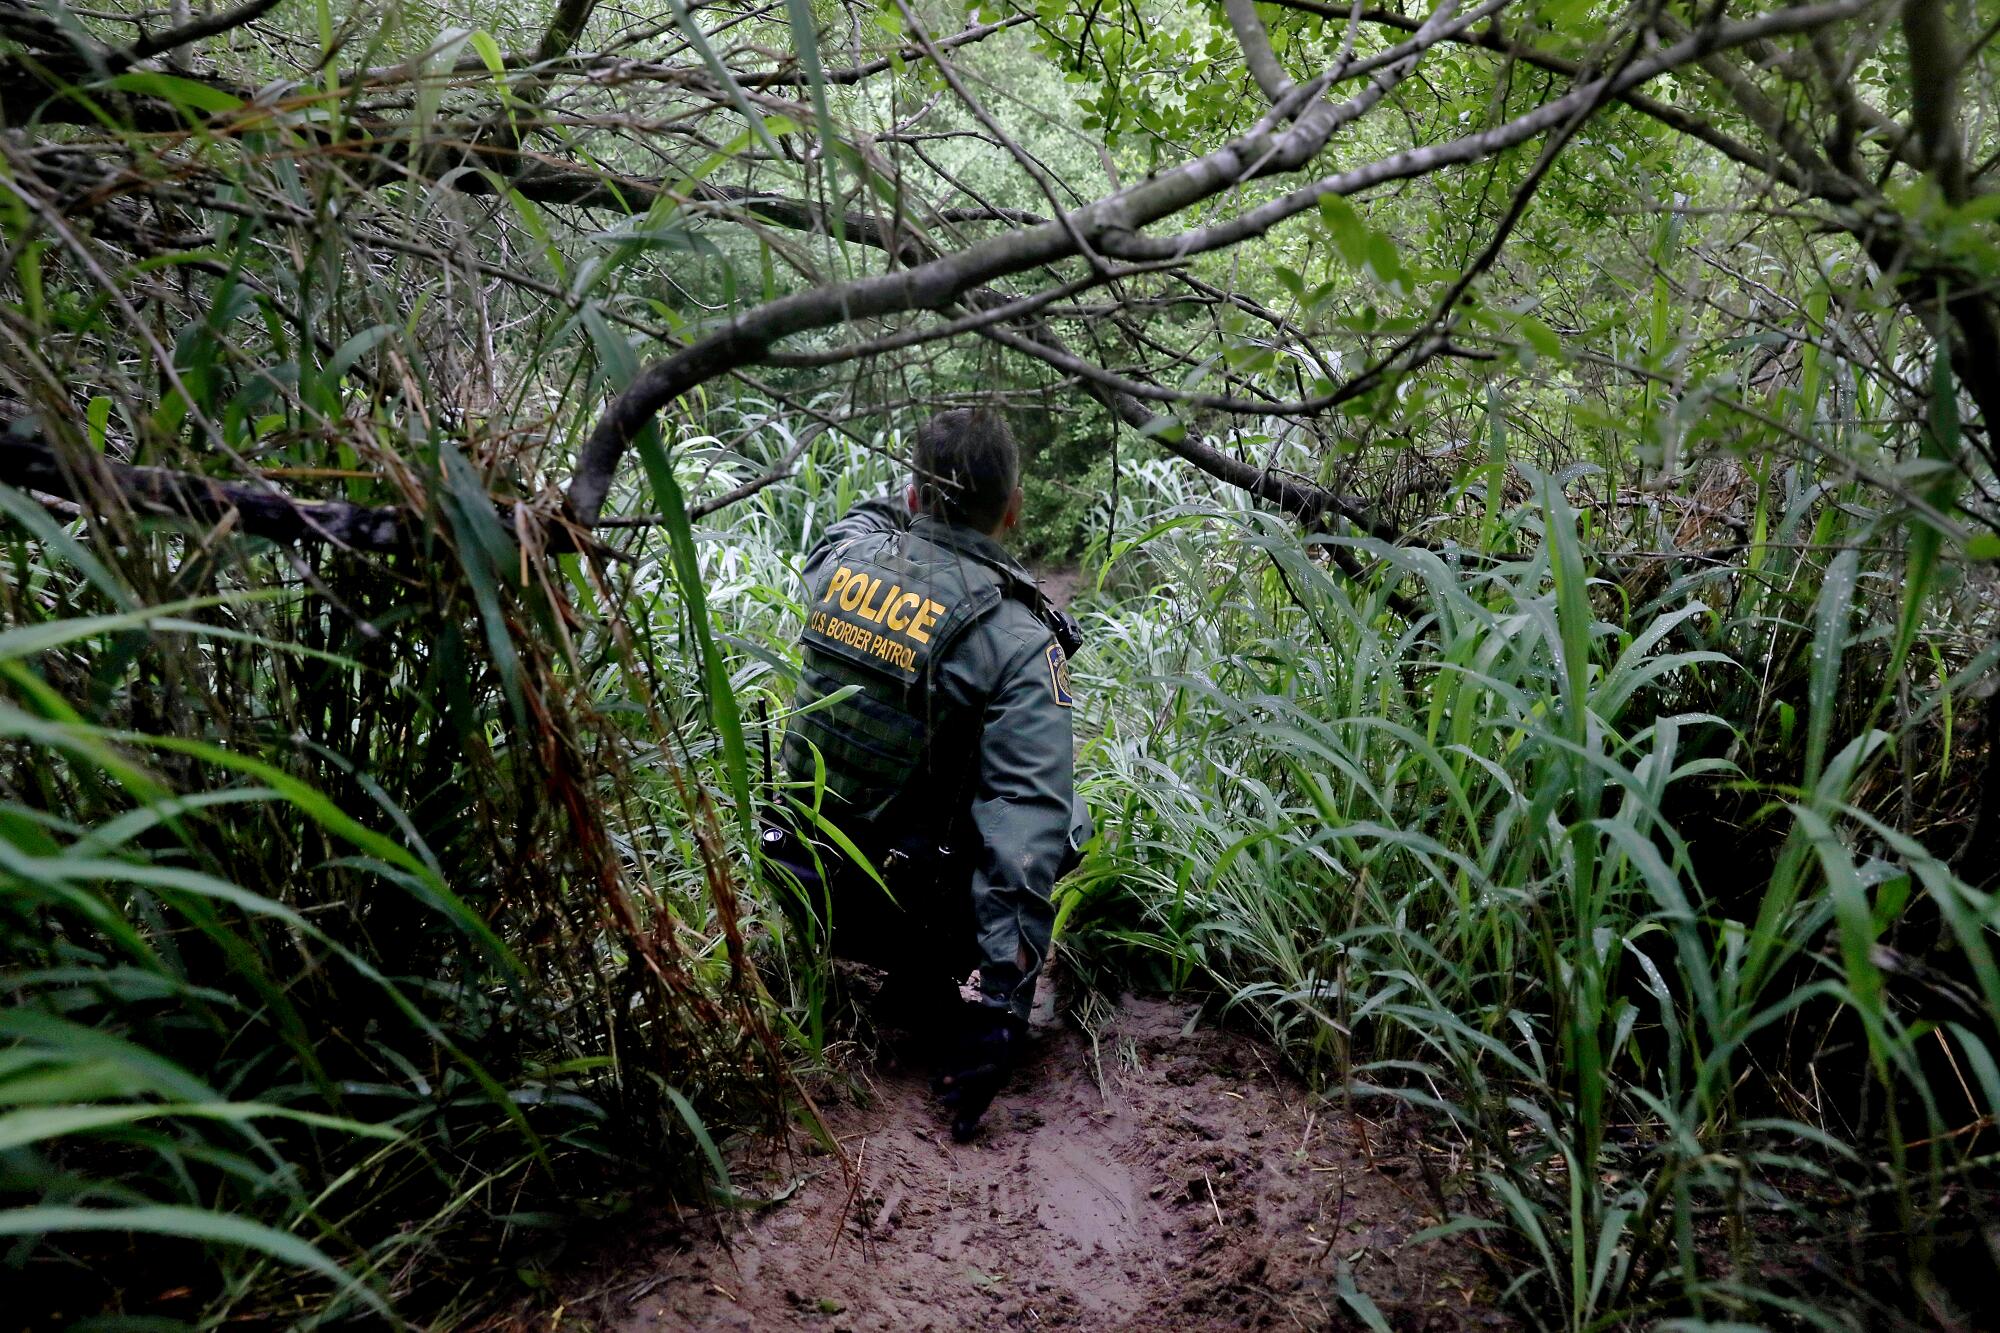 A Border Patrol agent in uniform navigates muddy ground and low tree branches